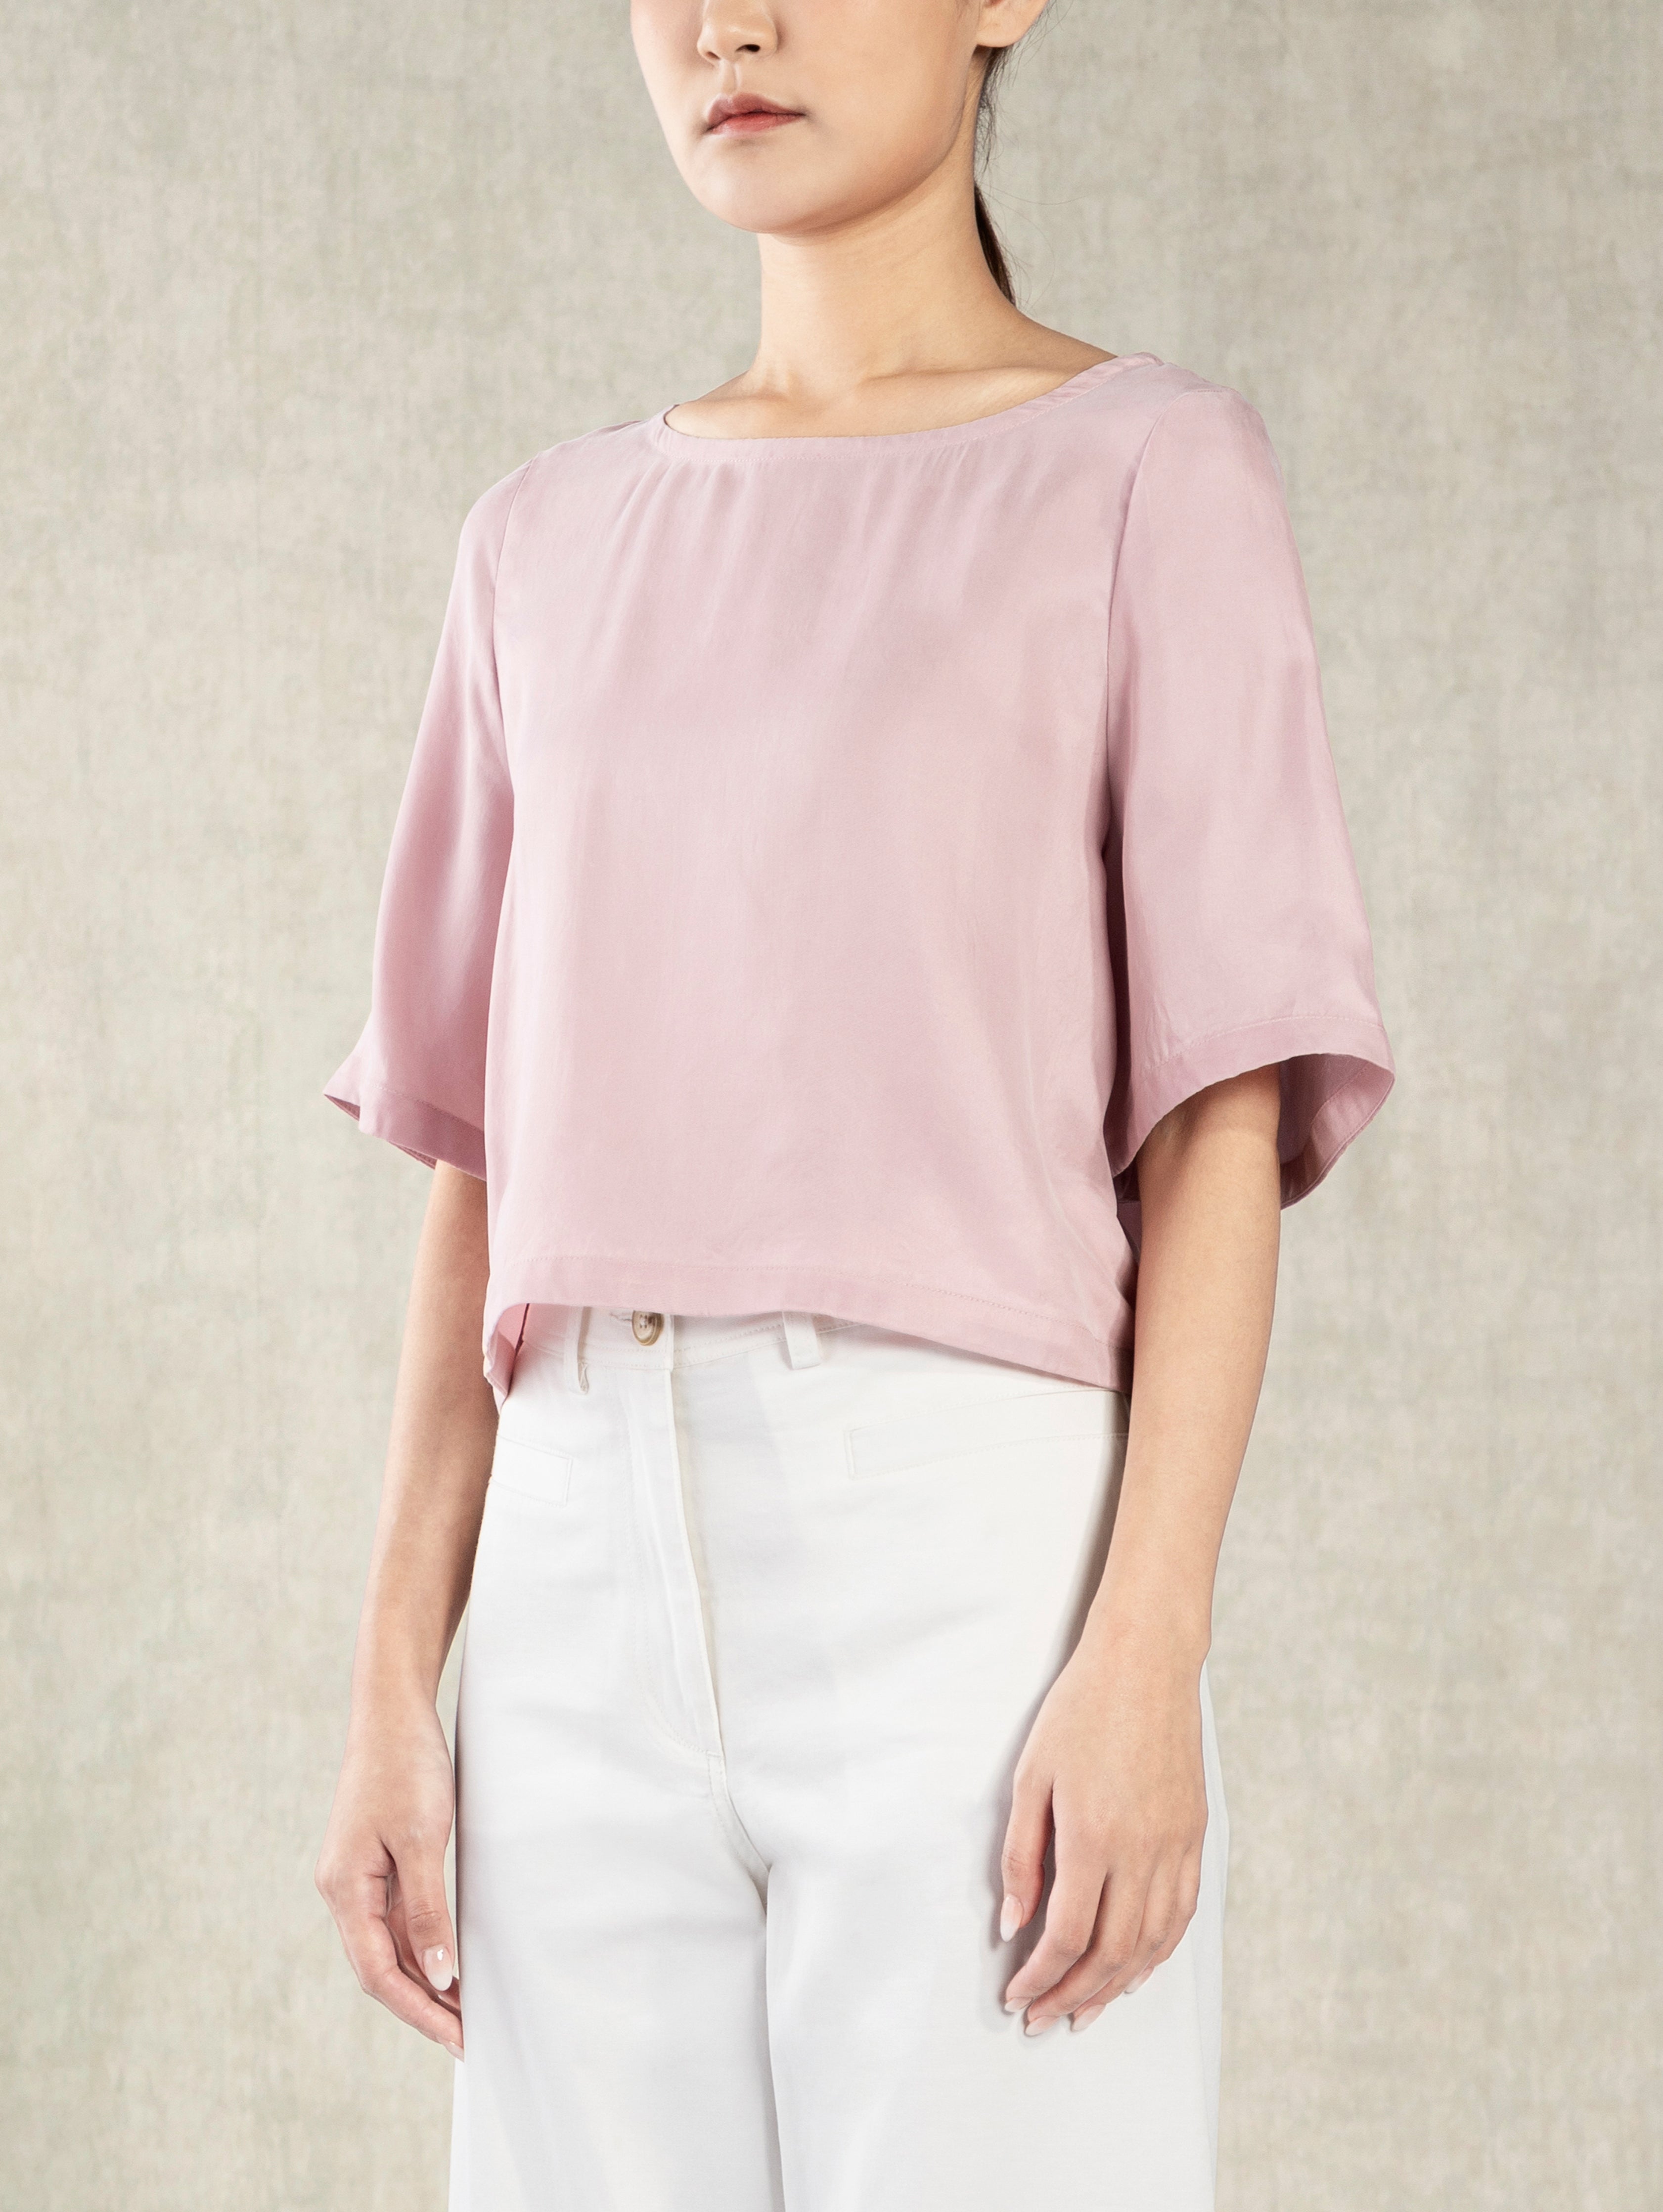 Evening Sand Fluid Boxy Top Womens Cropped Shirt